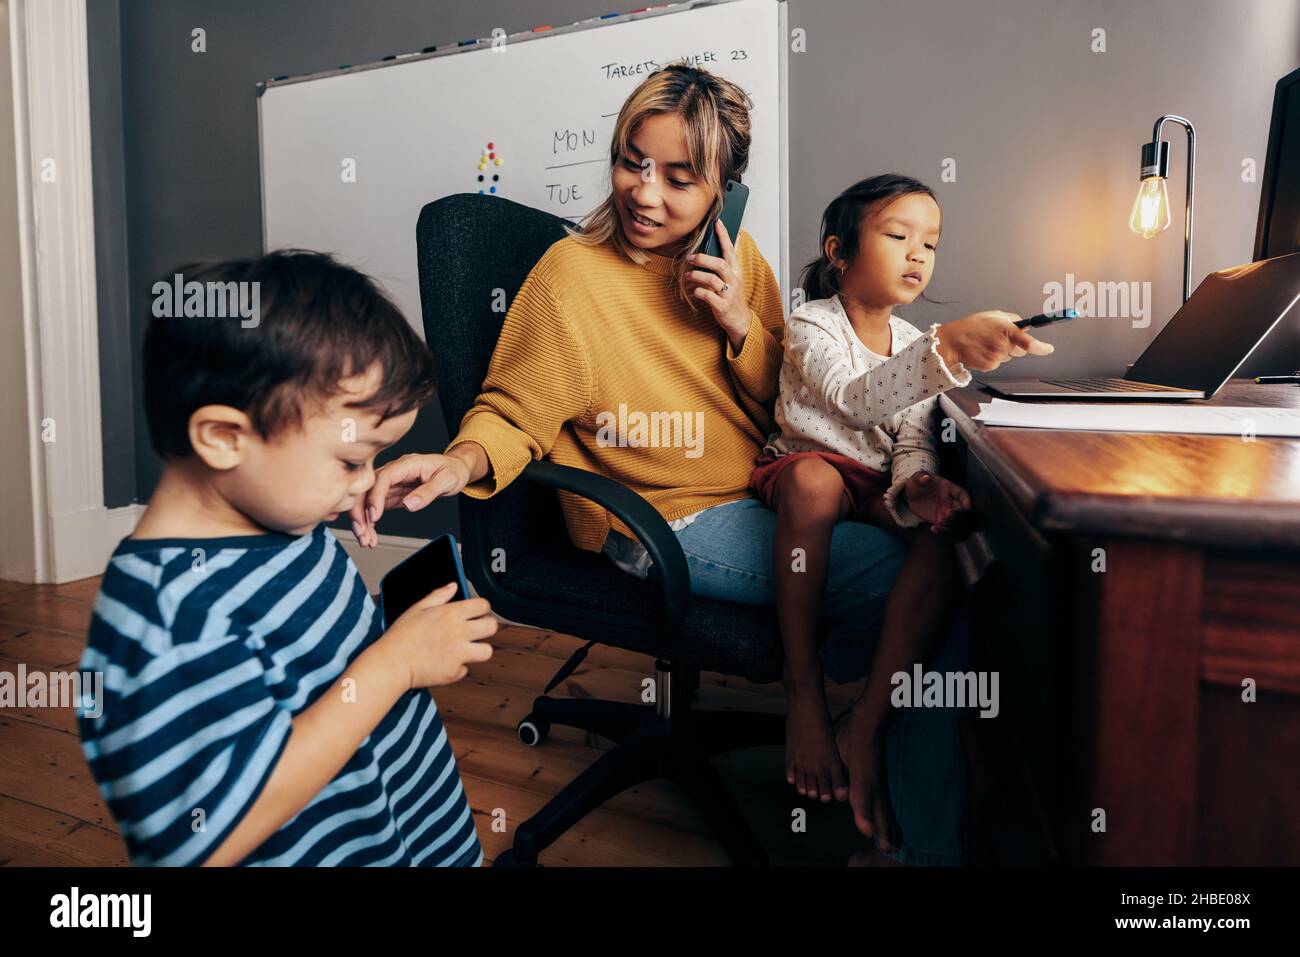 Multi-tasking mother of two working in her home office. Working mom taking a business phone call with her kids playing at her desk. Single mom communi Stock Photo